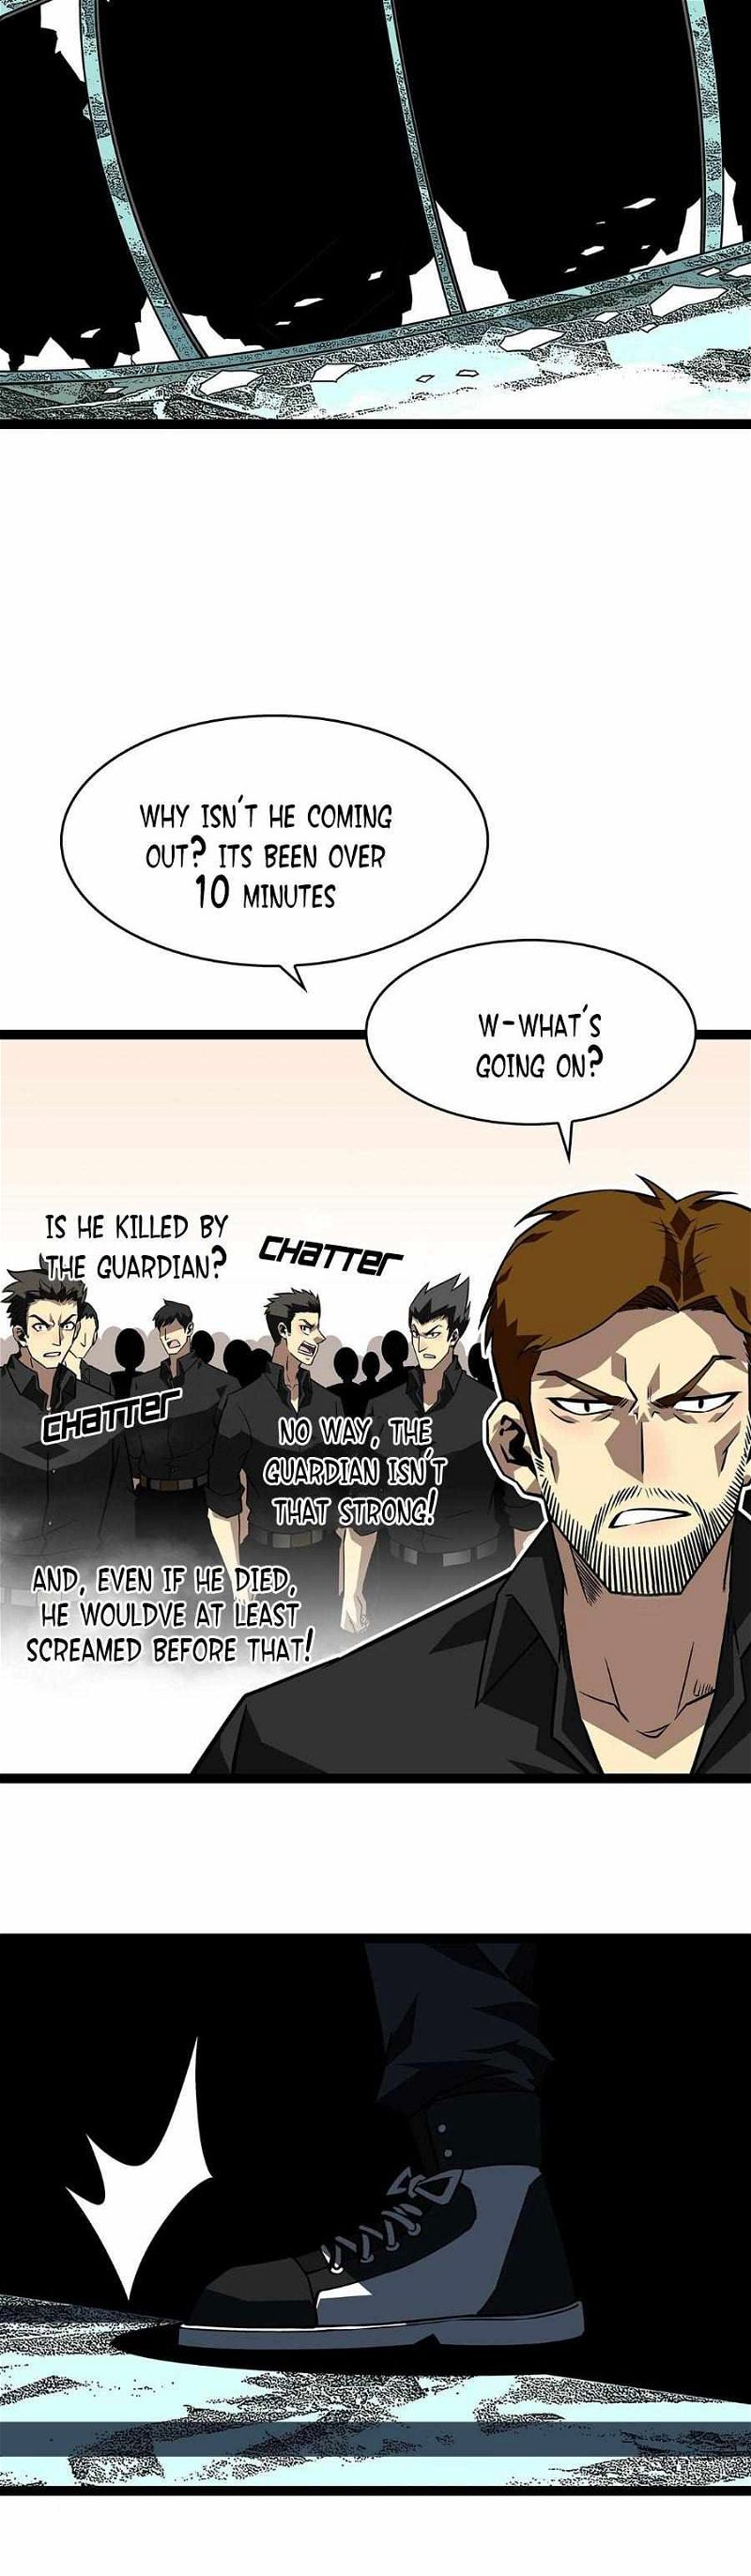 It all starts with playing game seriously Chapter 116 page 6 - MangaWeebs.in